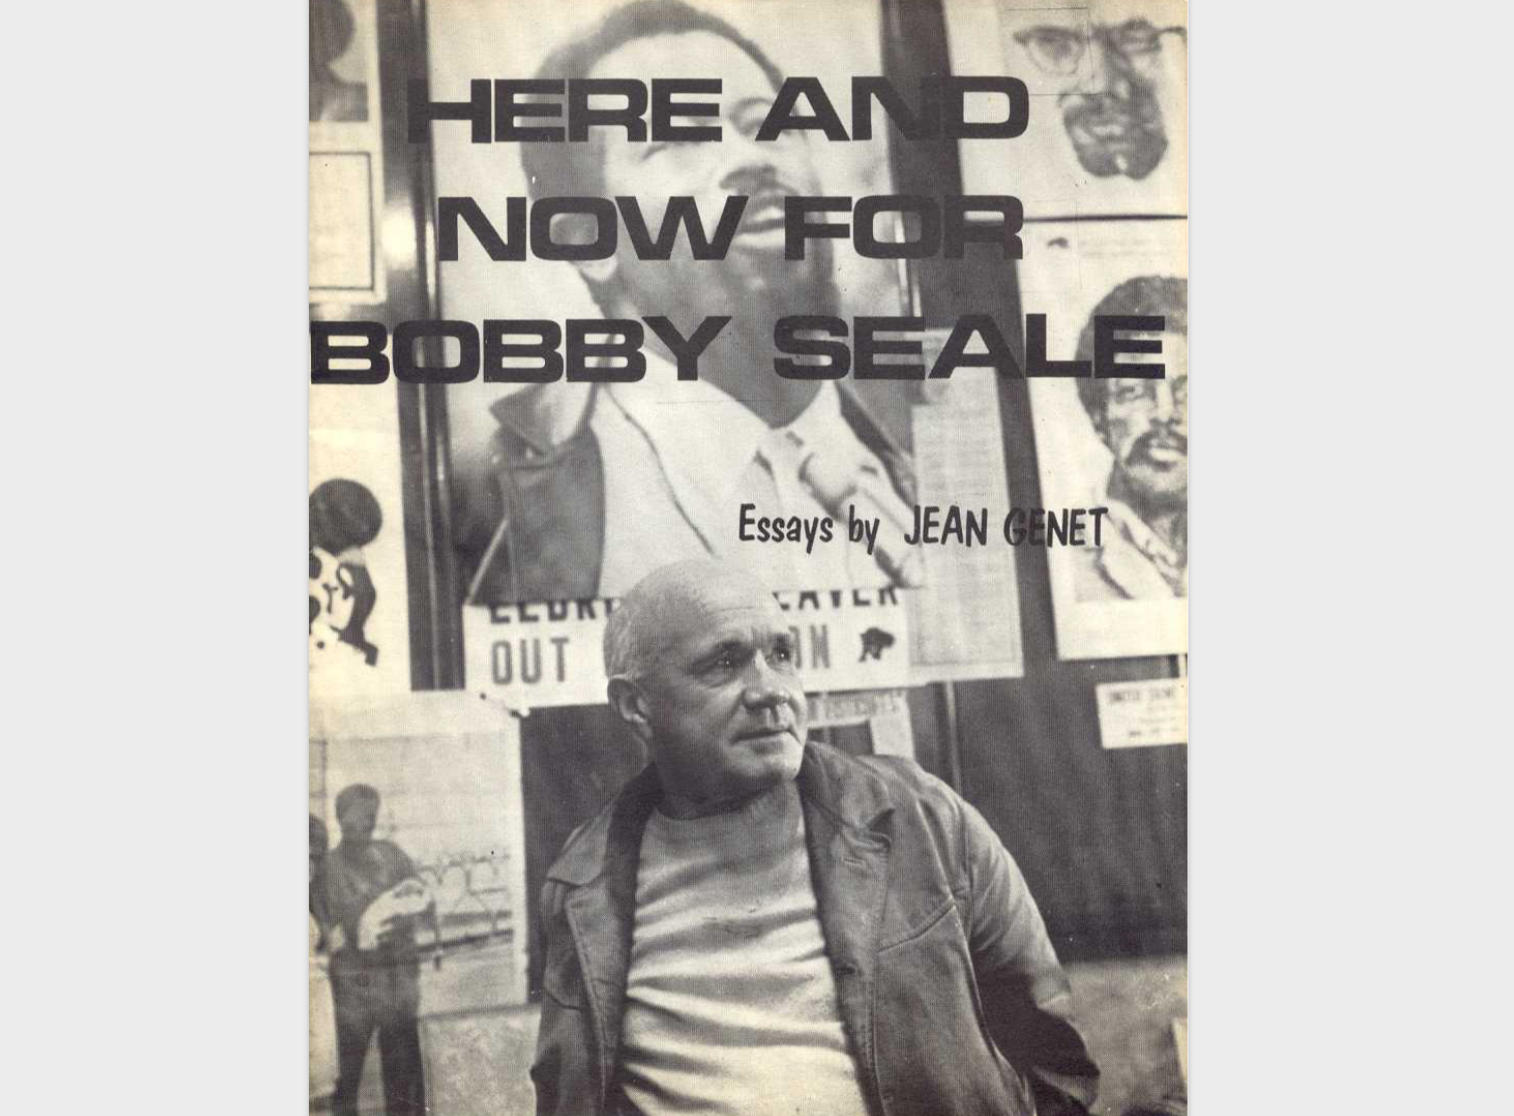 Jean Genet’s May Day Speech, 1970: “Your Real Life Depends on the Black Panther Party”